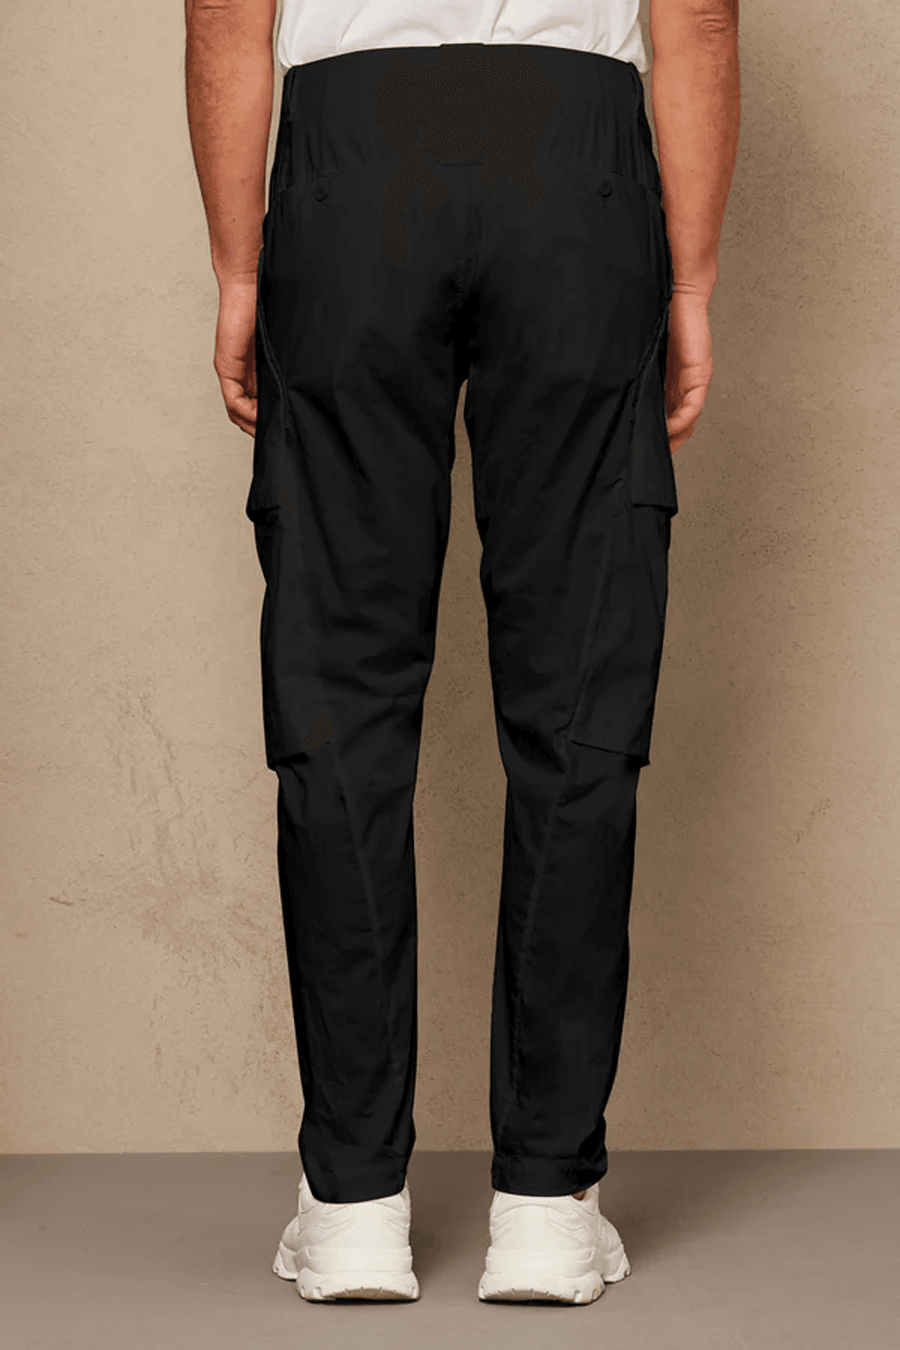 Buy the Transit Lightweight Cargo Trousers in Black at Intro. Spend £50 for free UK delivery. Official stockists. We ship worldwide.